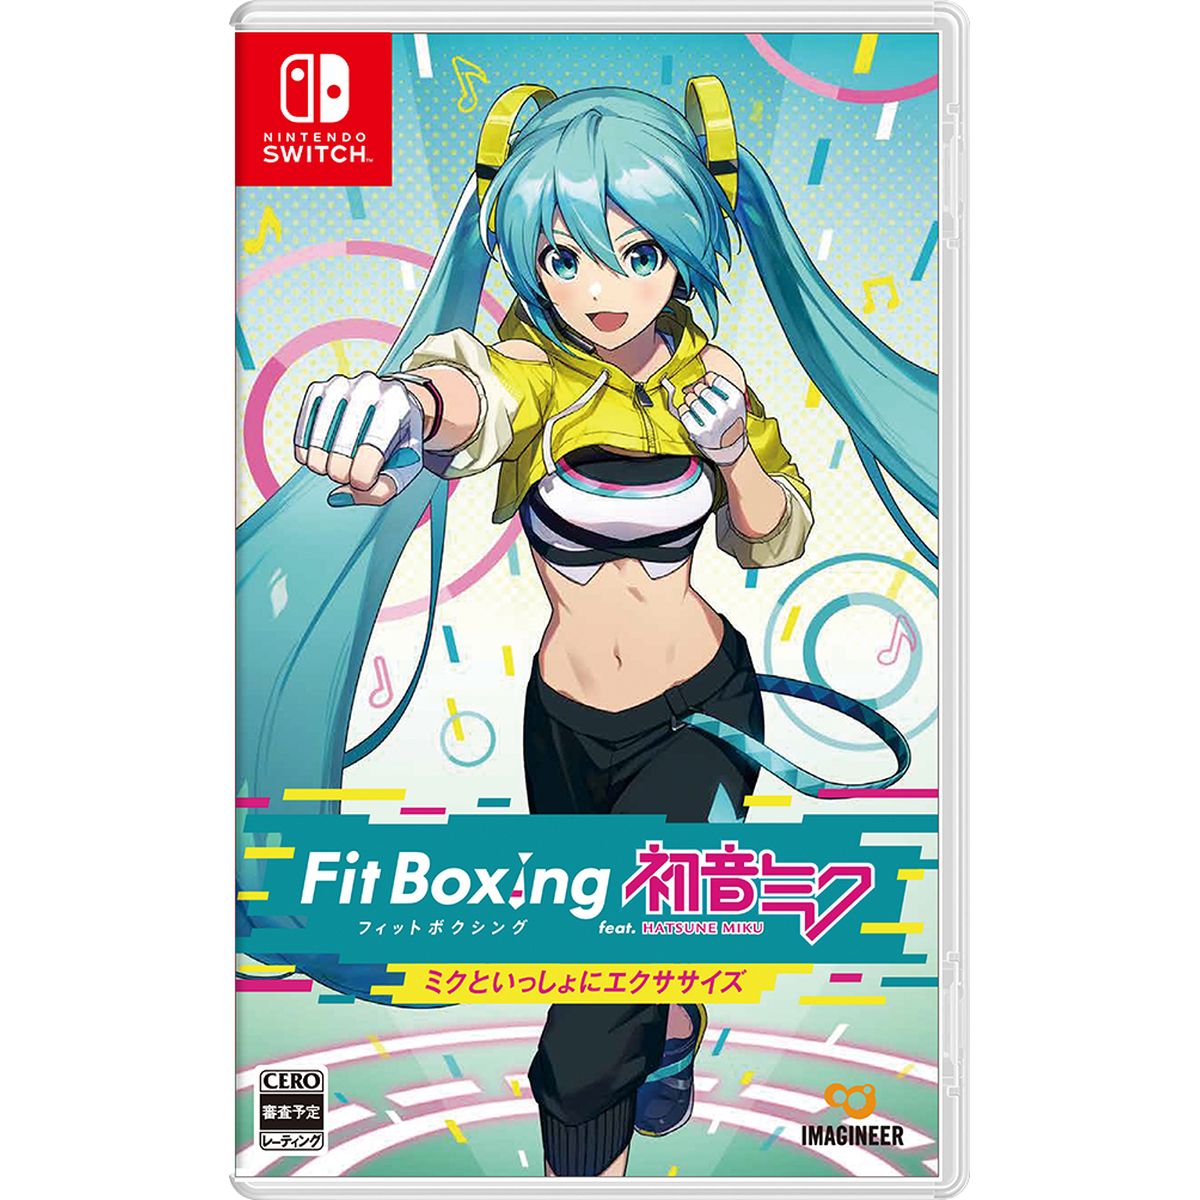 ［Switch］［宅配便］Fit Boxing feat. 初音ミク ‐ミクといっしょにエクササイズ‐